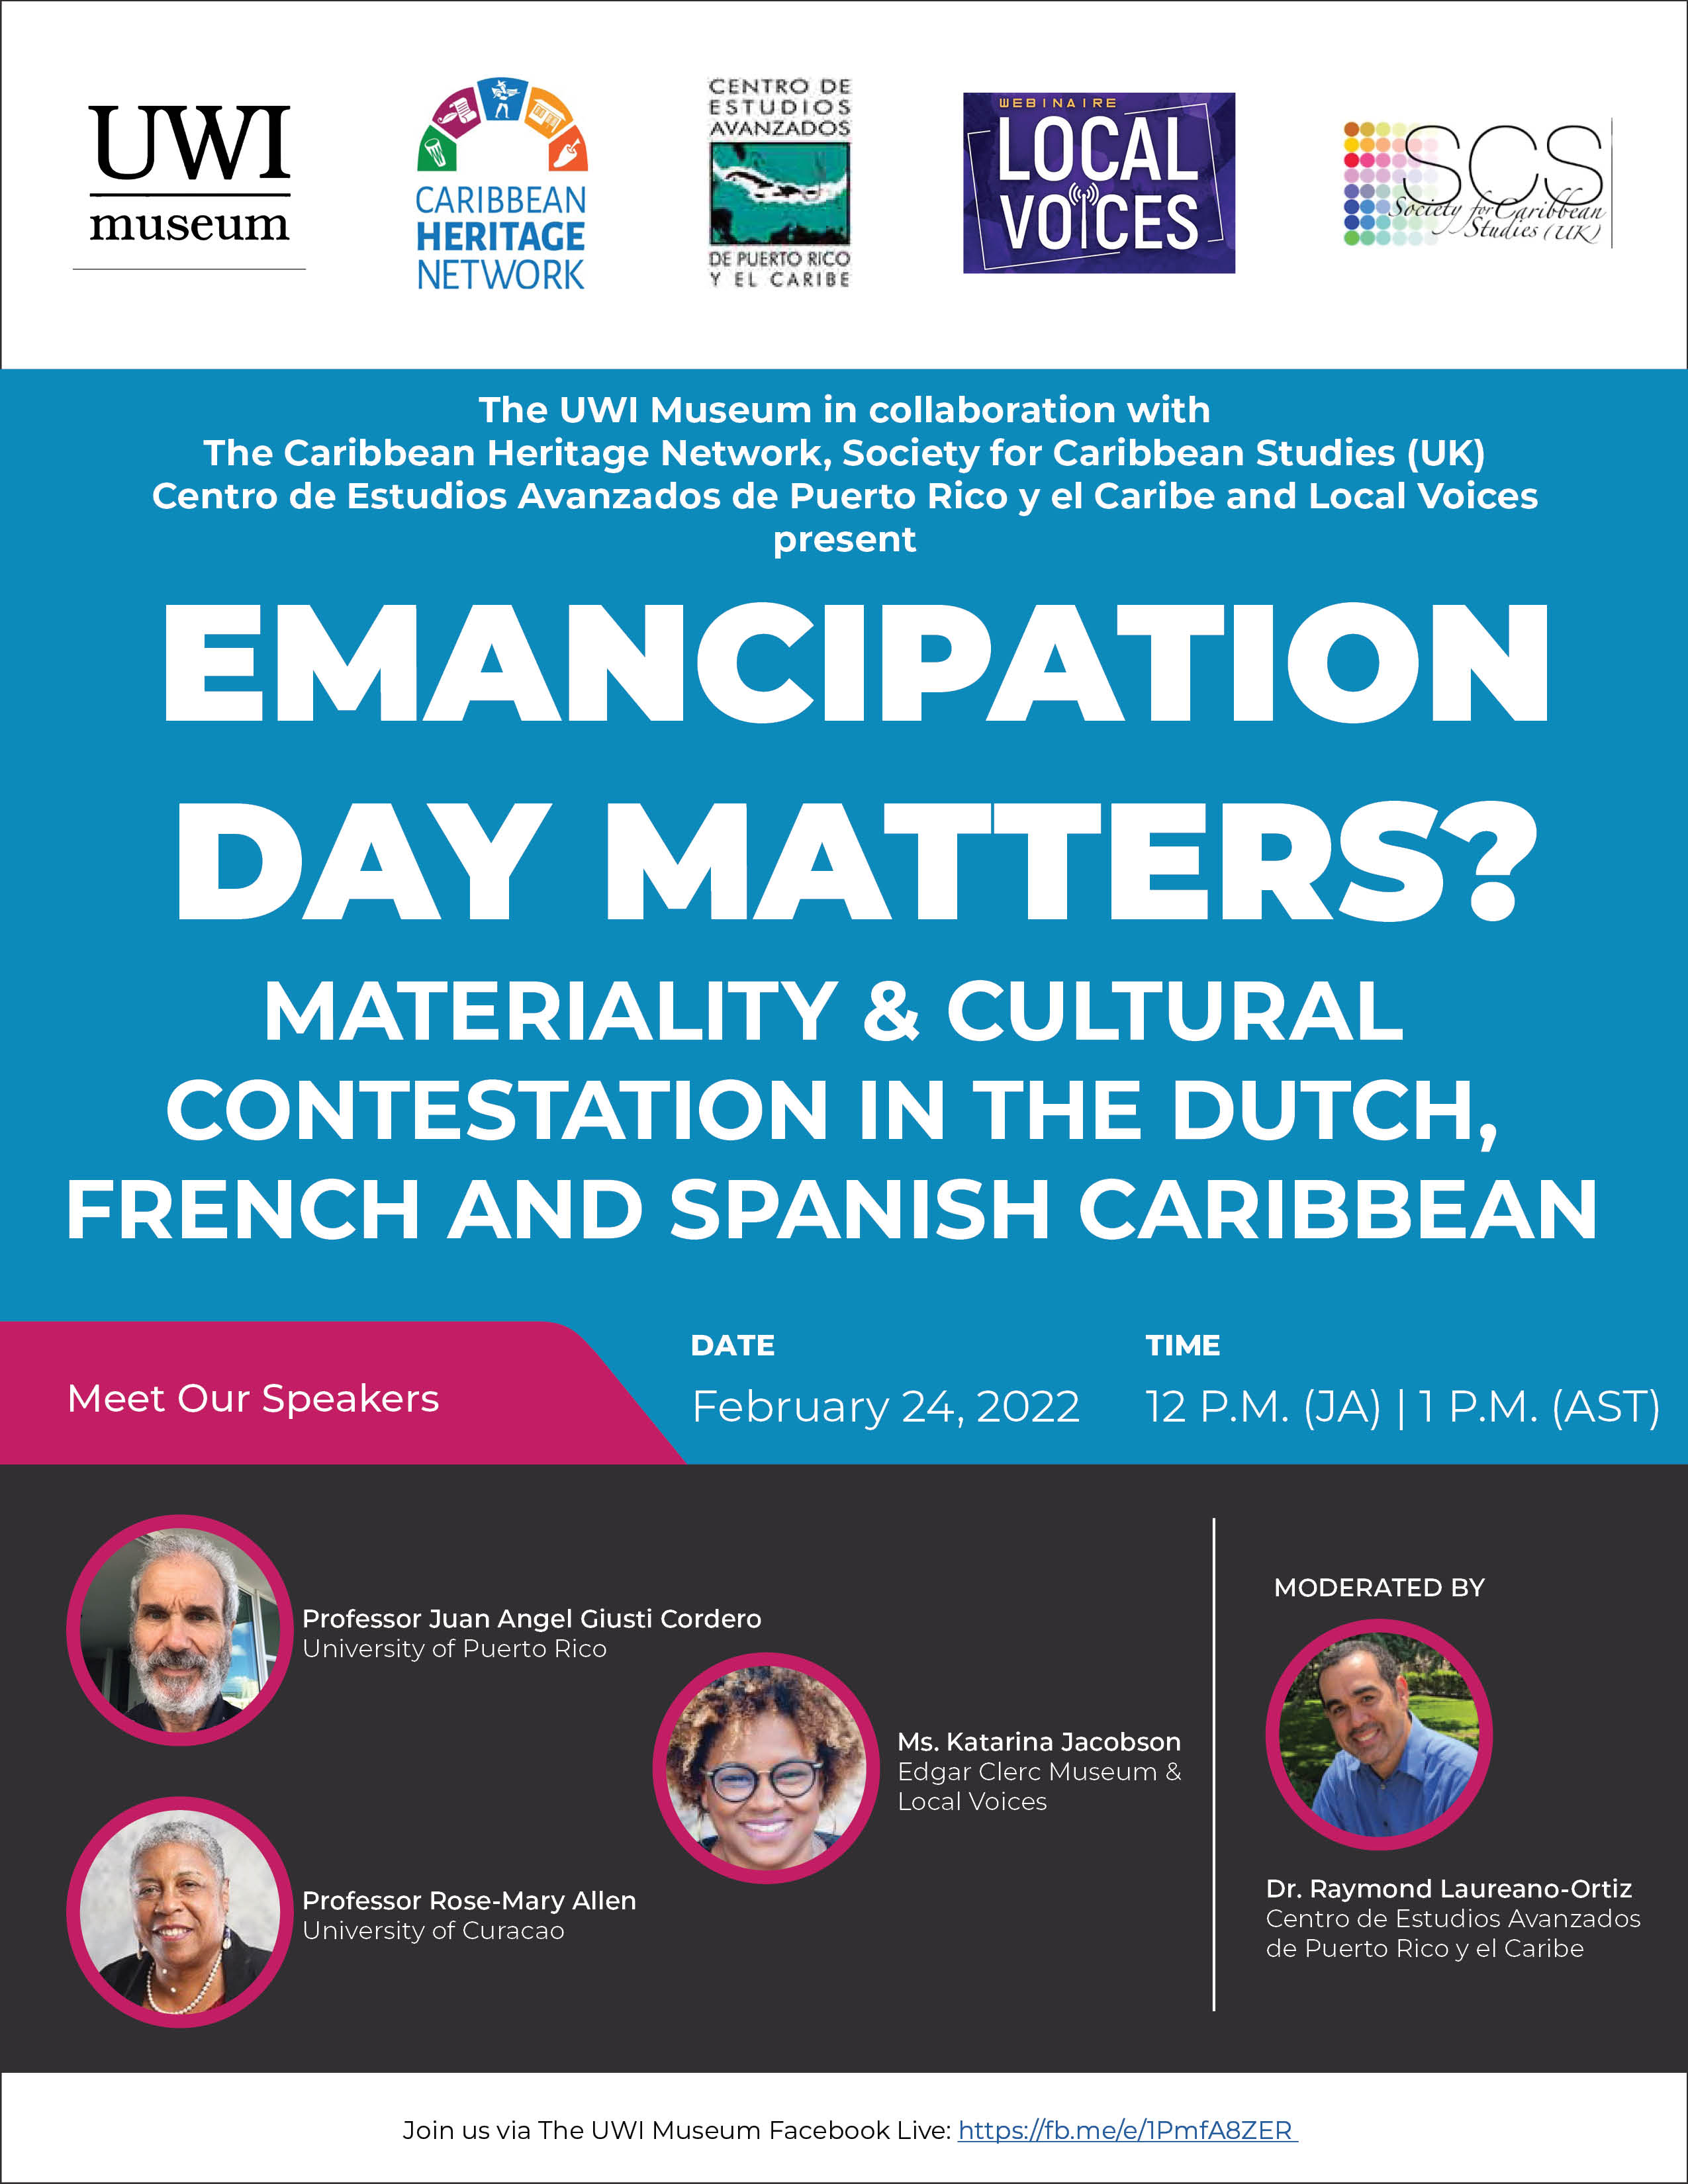 PUBLISH Emancipation Day Matters? Materiality & Cultural Contestation in the Dutch, French & Spanish Caribbean